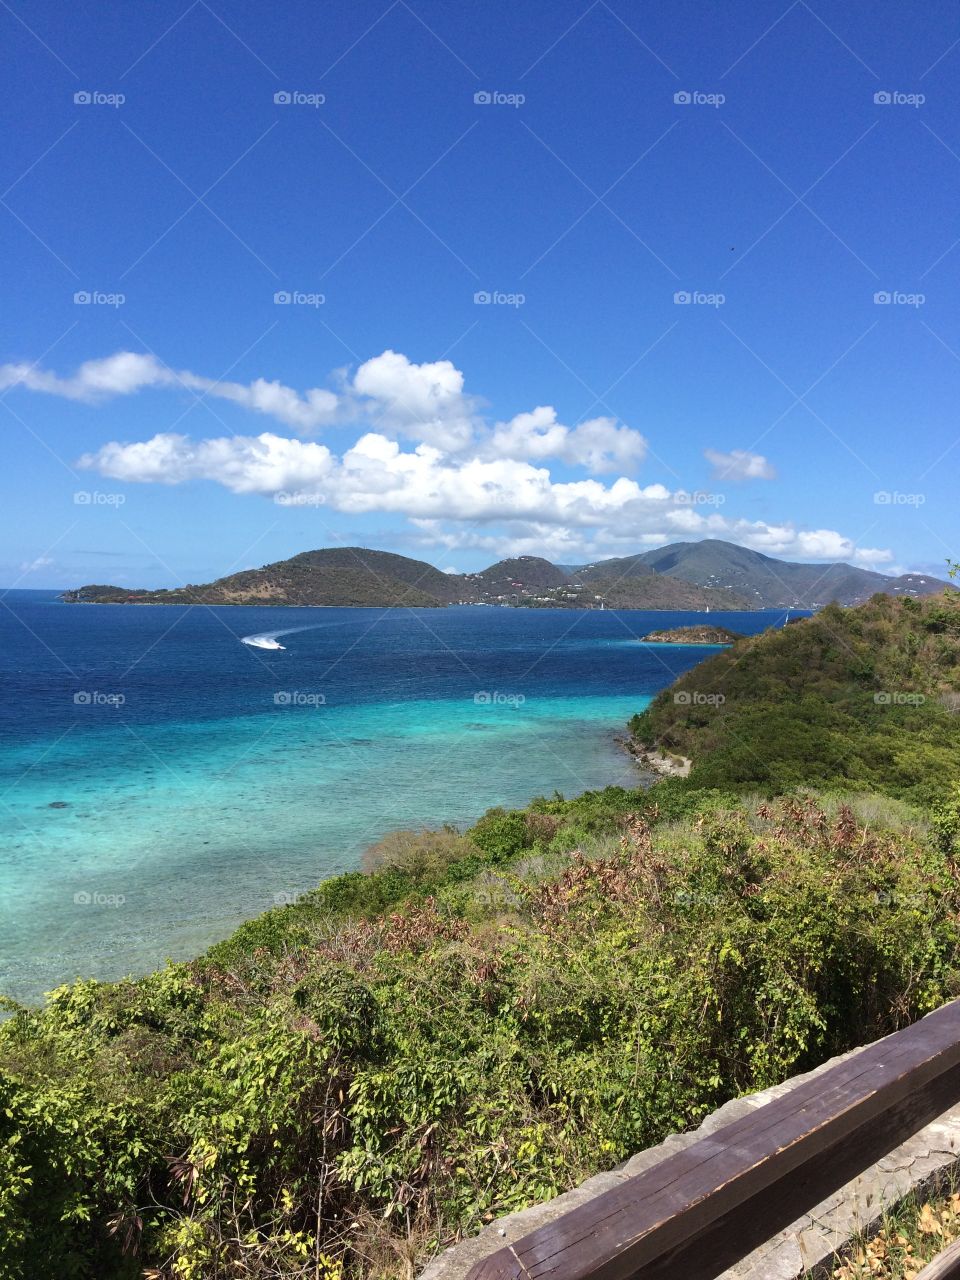 Looking at the beach and ocean in St John, USVI